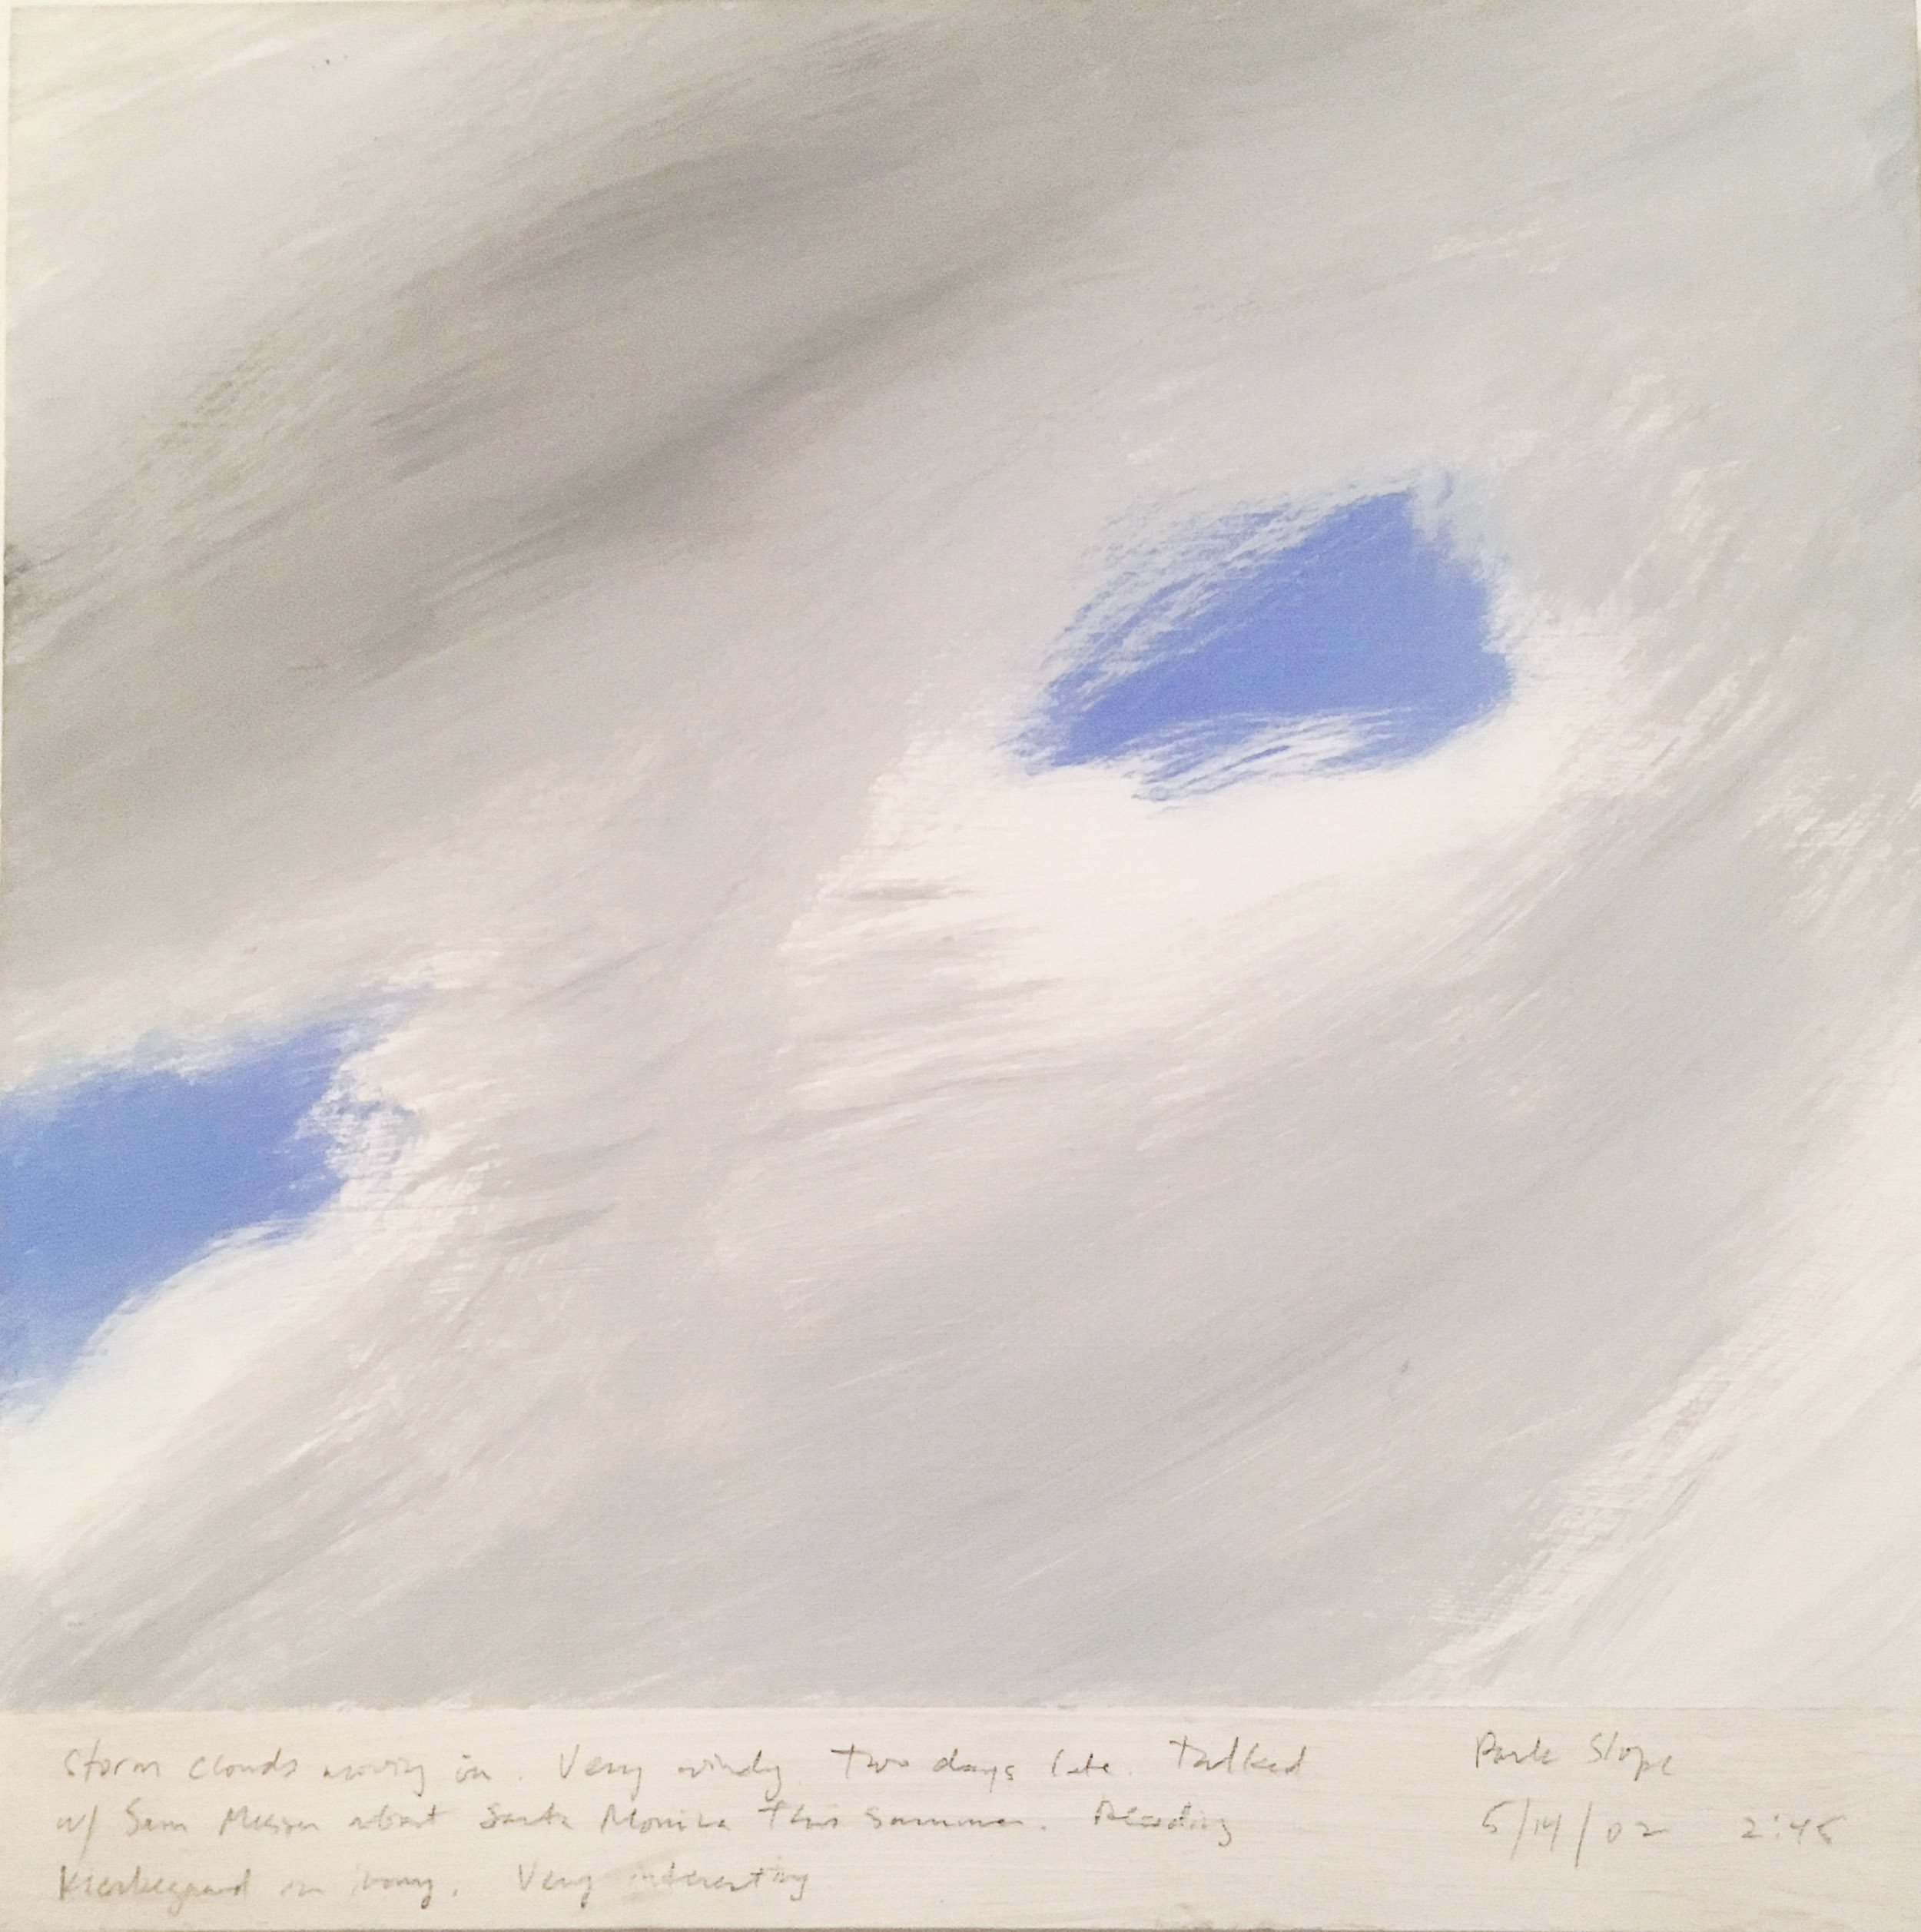 A 14 × 14 inch, acrylic painting of the sky. A journal entry is handwritten on the painting:

“Storm clouds moving in. Very windy. Two days late. Talked with Sam Messer about Santa Monica this summer. Reading Kierkegaard on irony. Very interesting.

Park Slope
5/14/02 2:45”